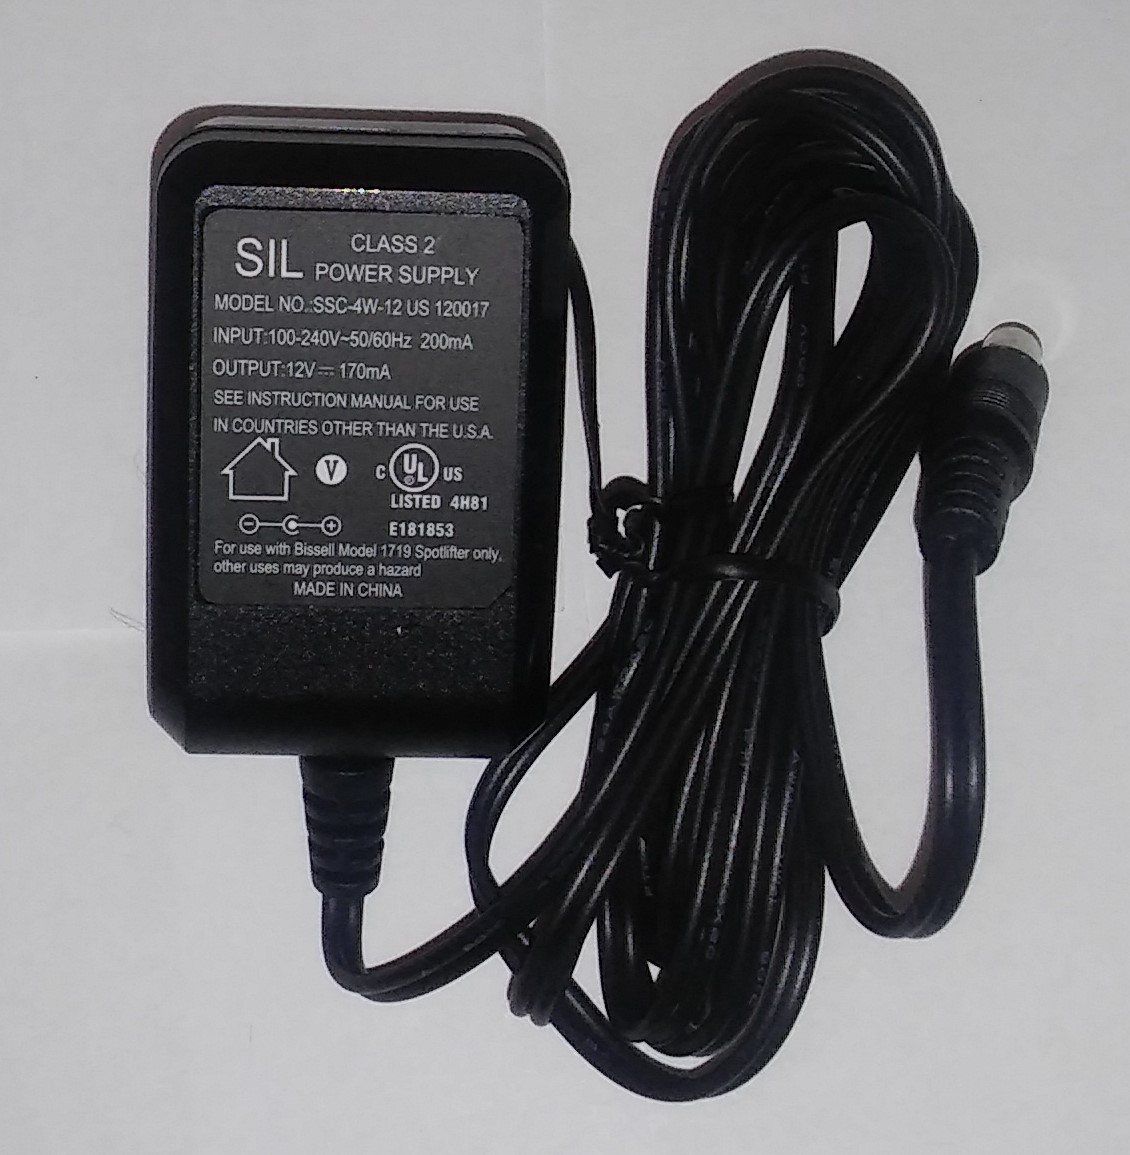 NEW 12V 170mA SIL SSC-4W-12 US 120017 AC Adapter For Classic Universal OBD II Scanner AD310 - Click Image to Close